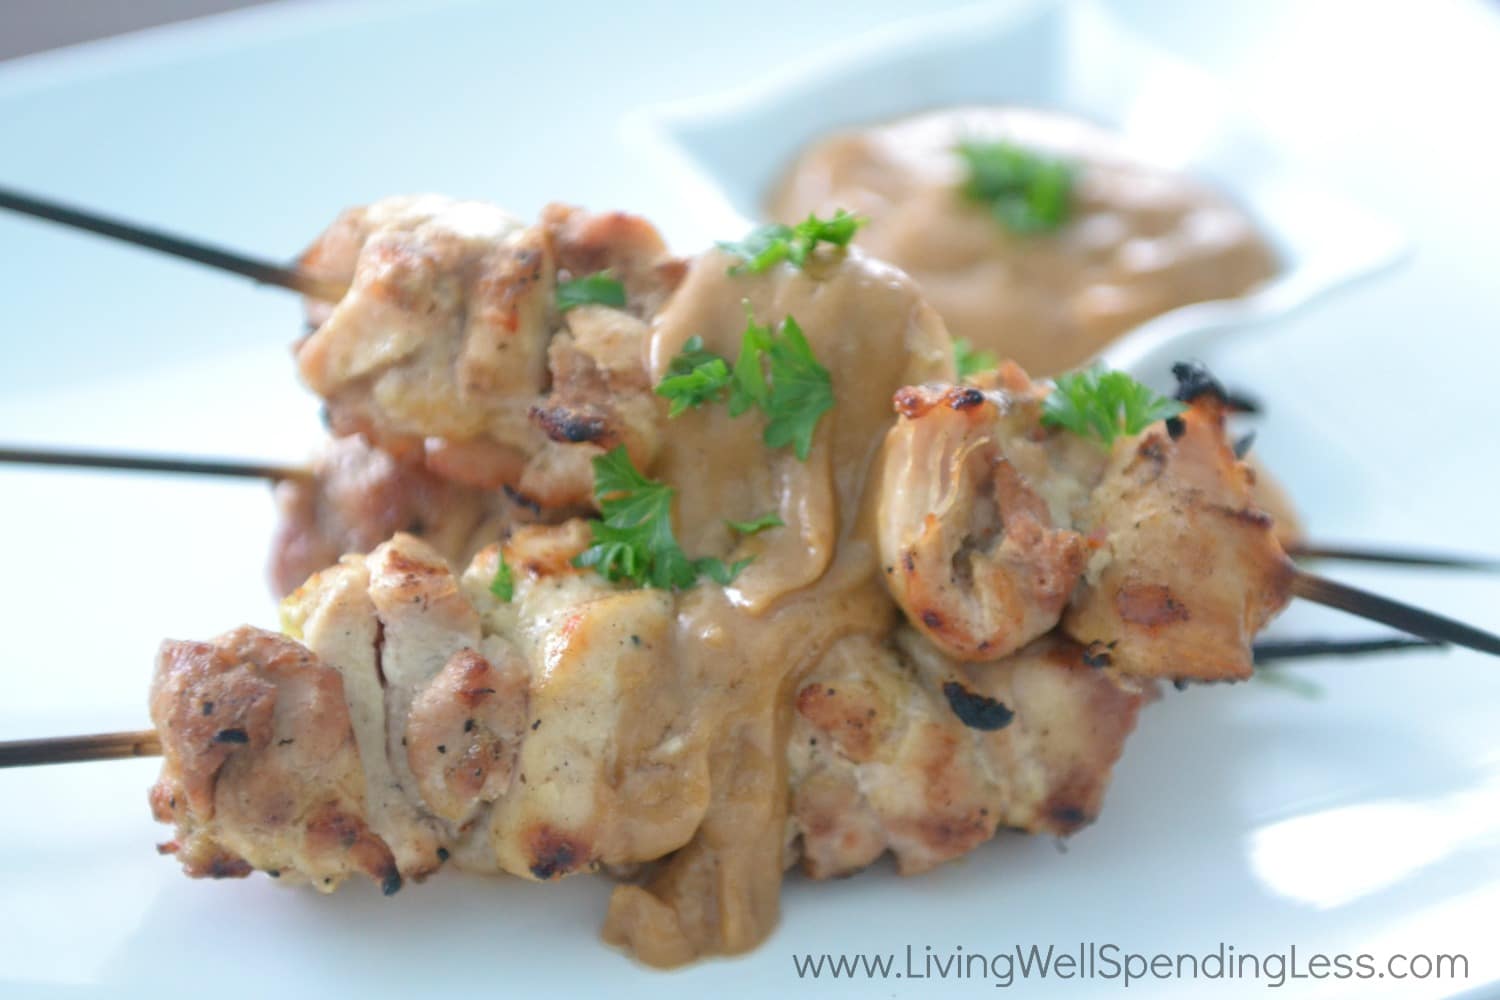 Chicken Satay Skewers are an easy make-ahead meal